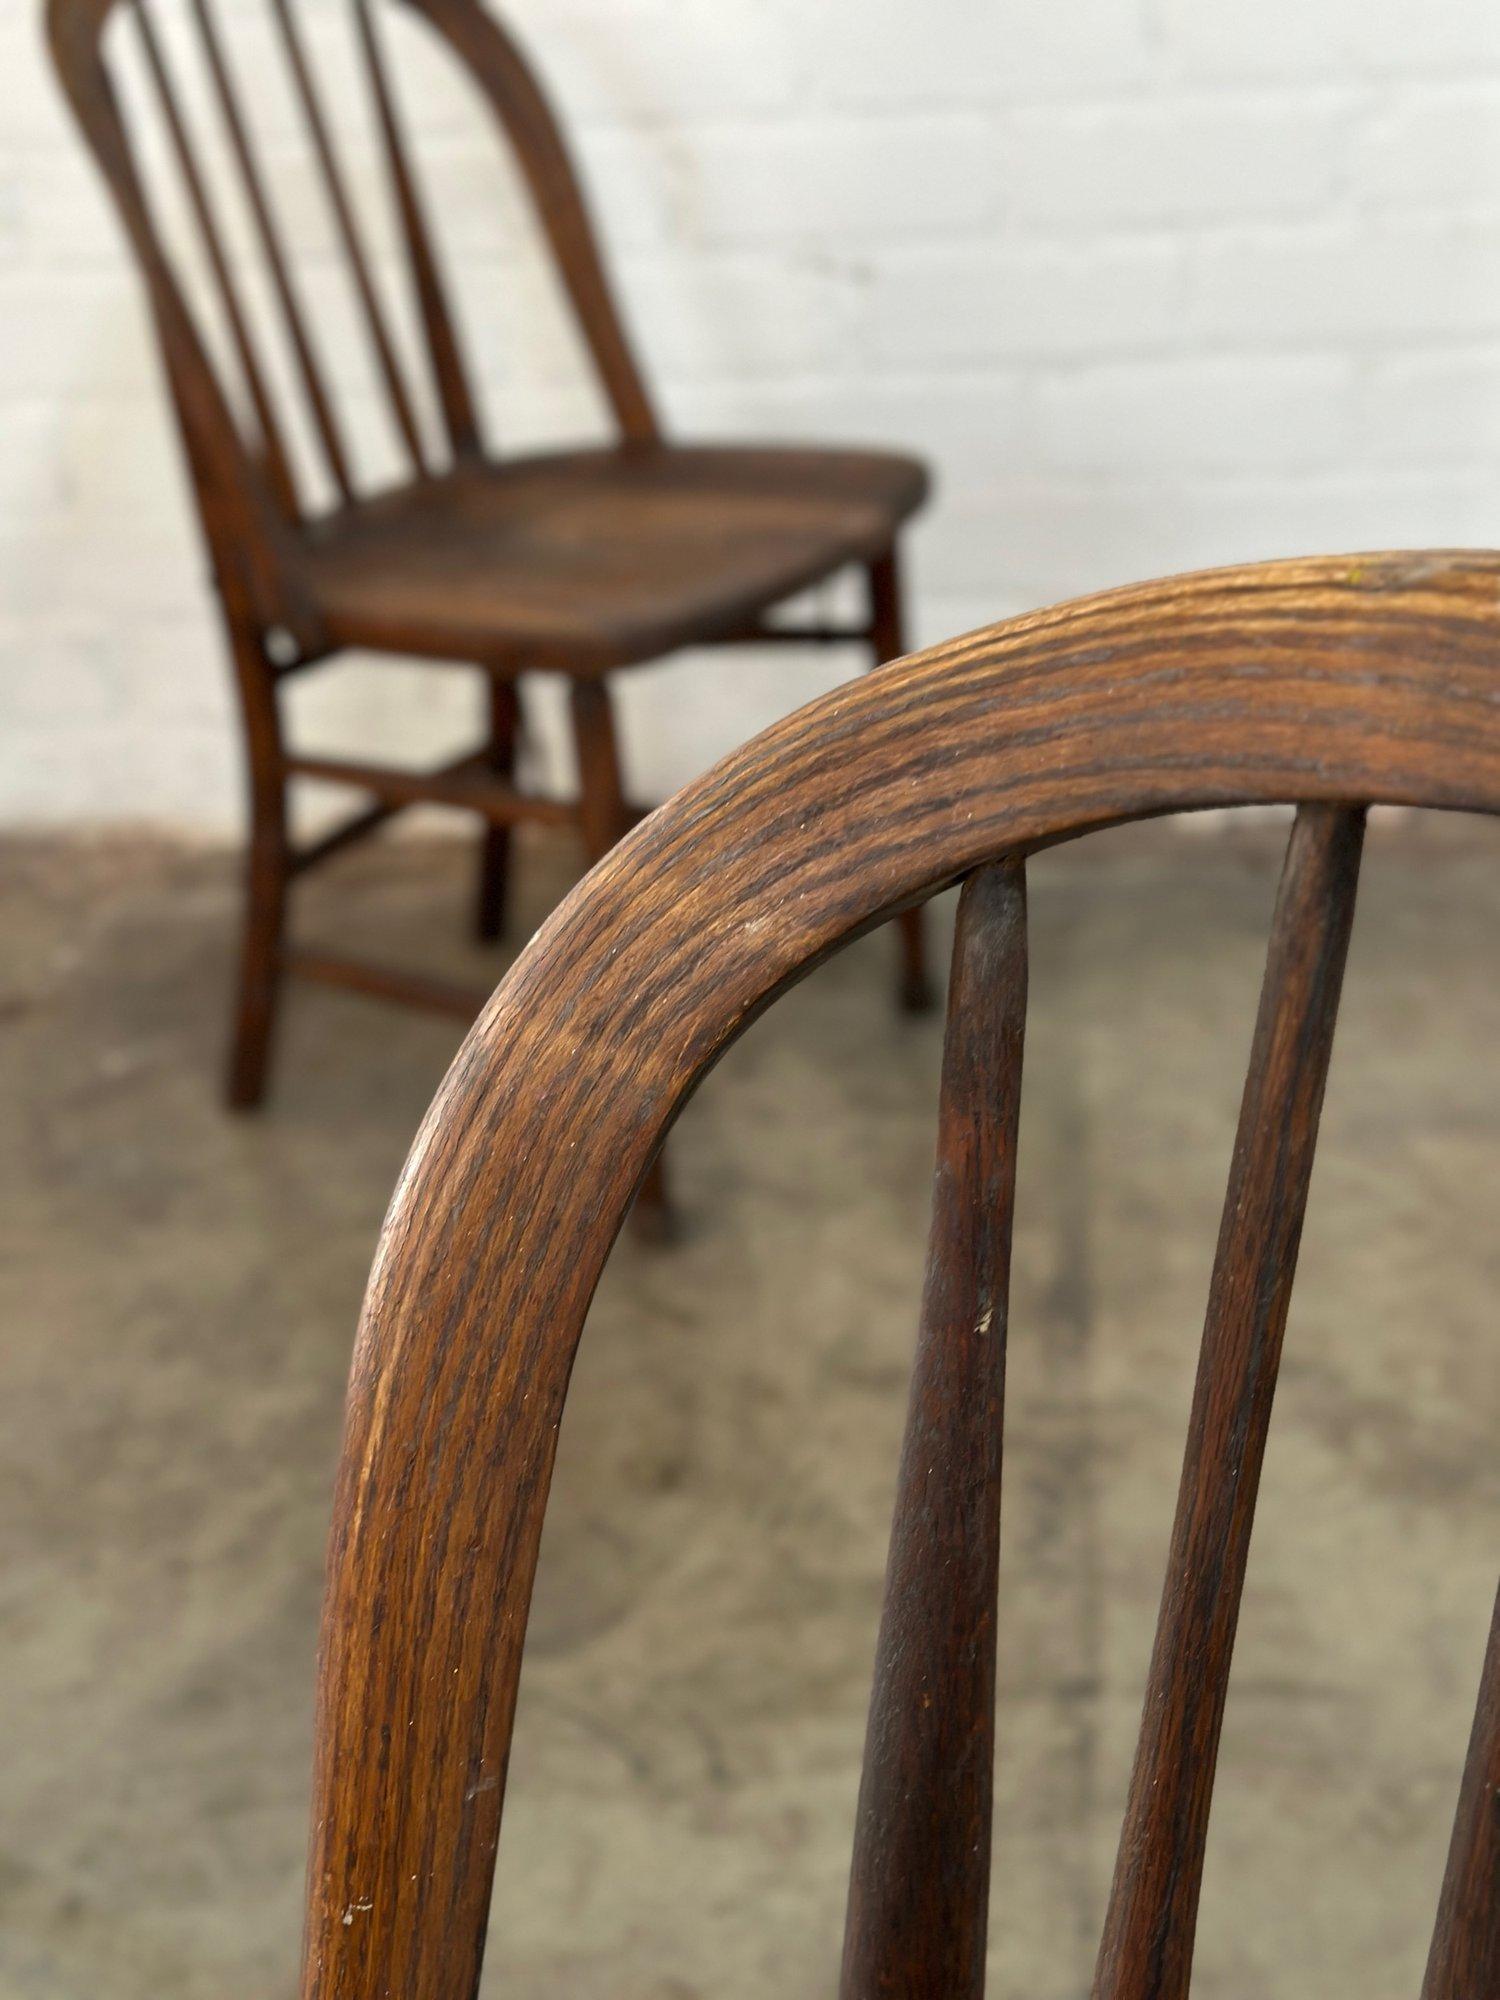 Mid-20th Century Vintage Farmhouse Spindle Chairs